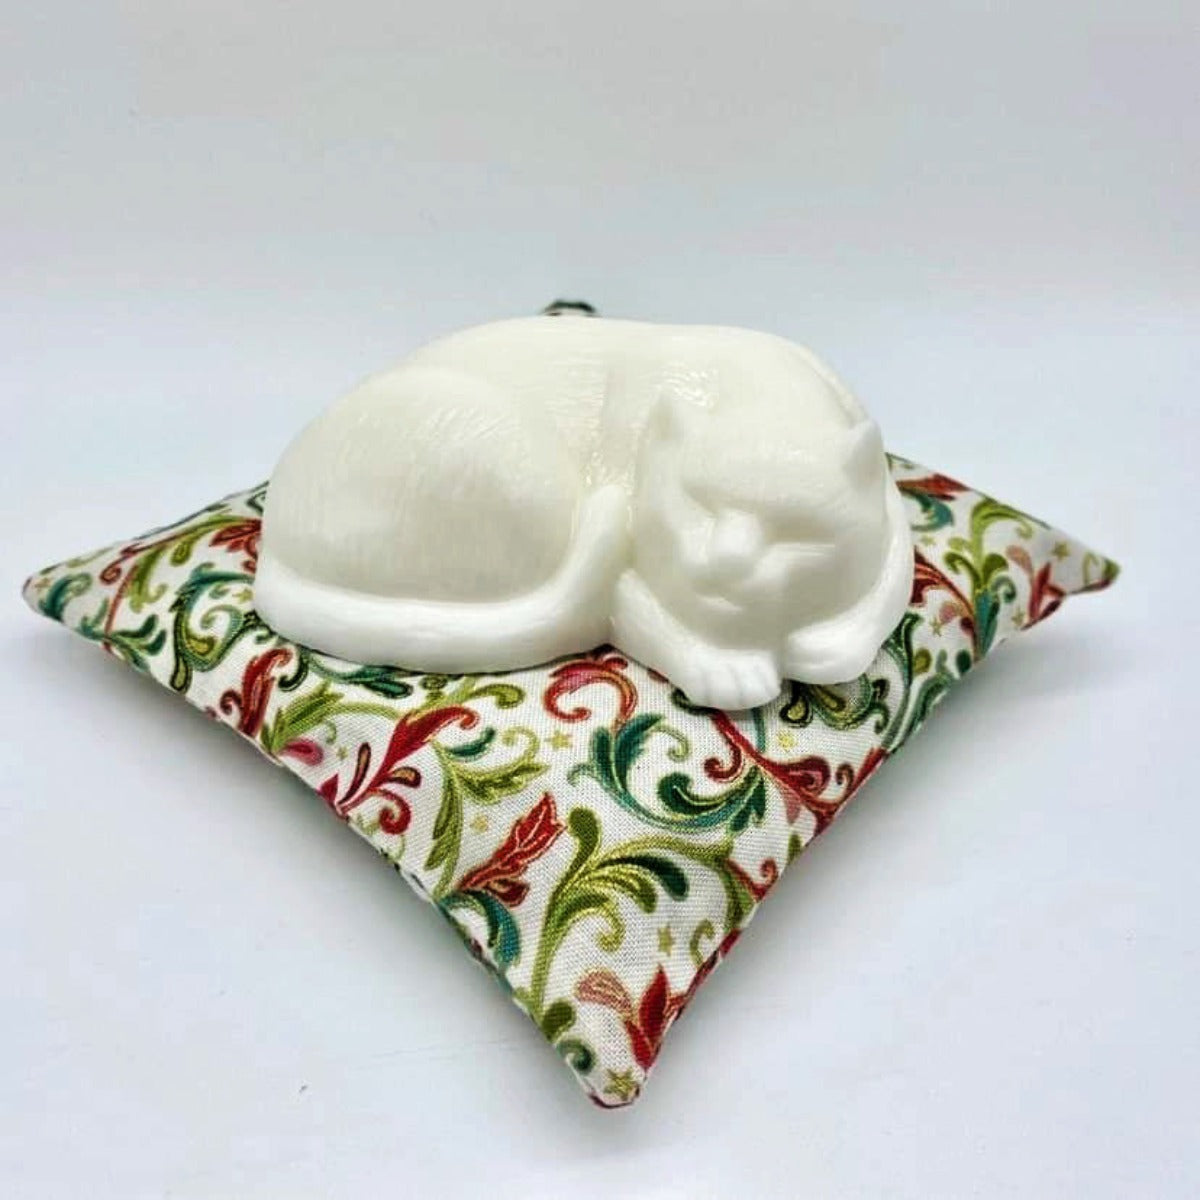 White sleeping cat-shaped soap on a red, green, gold and white paisley print square pillow